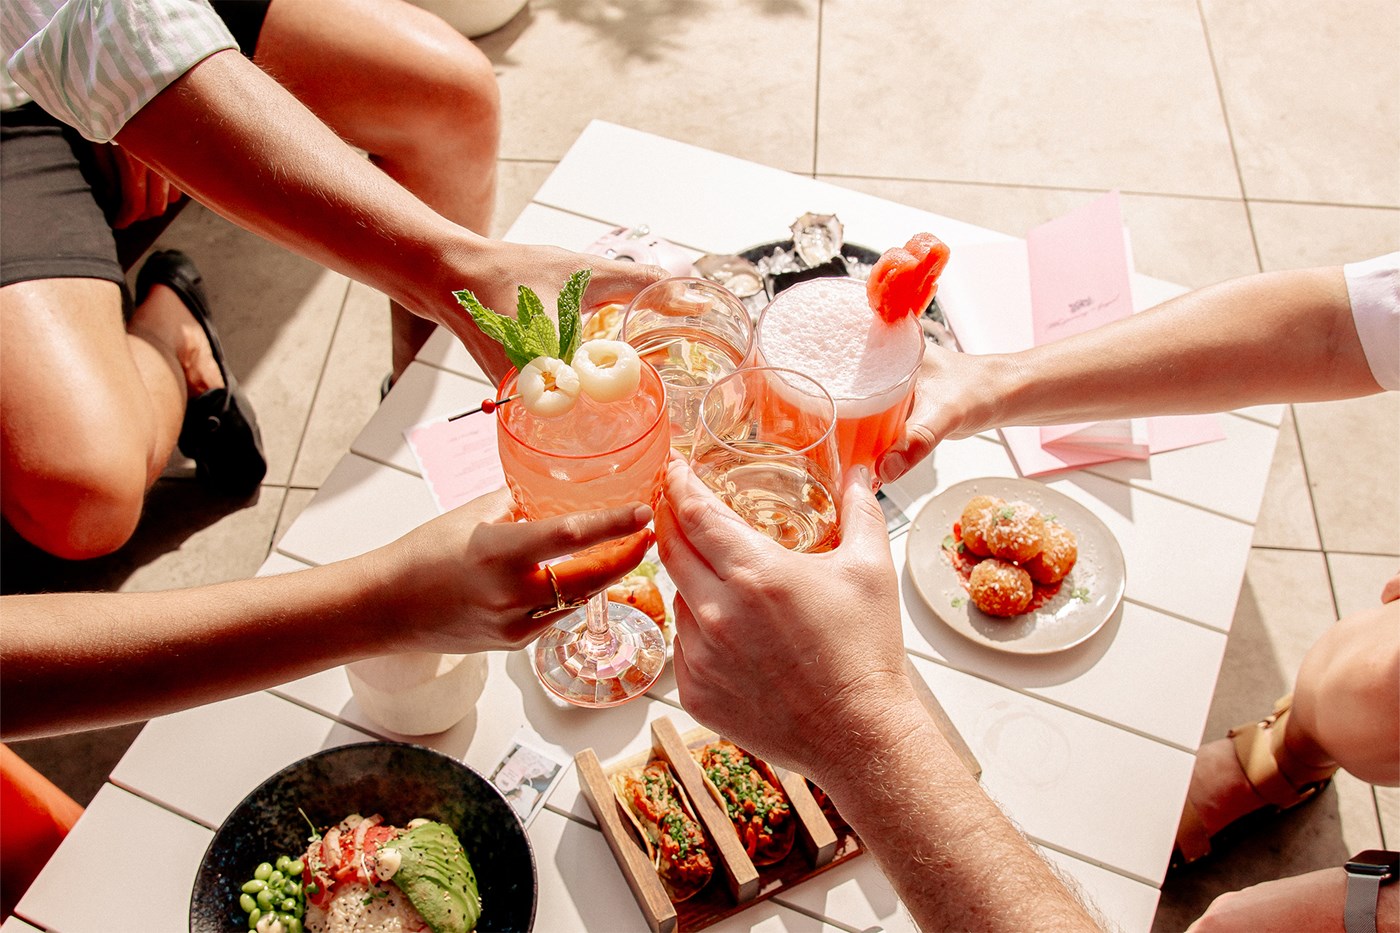 Four people clink pink cocktails together over a white table spread with food.